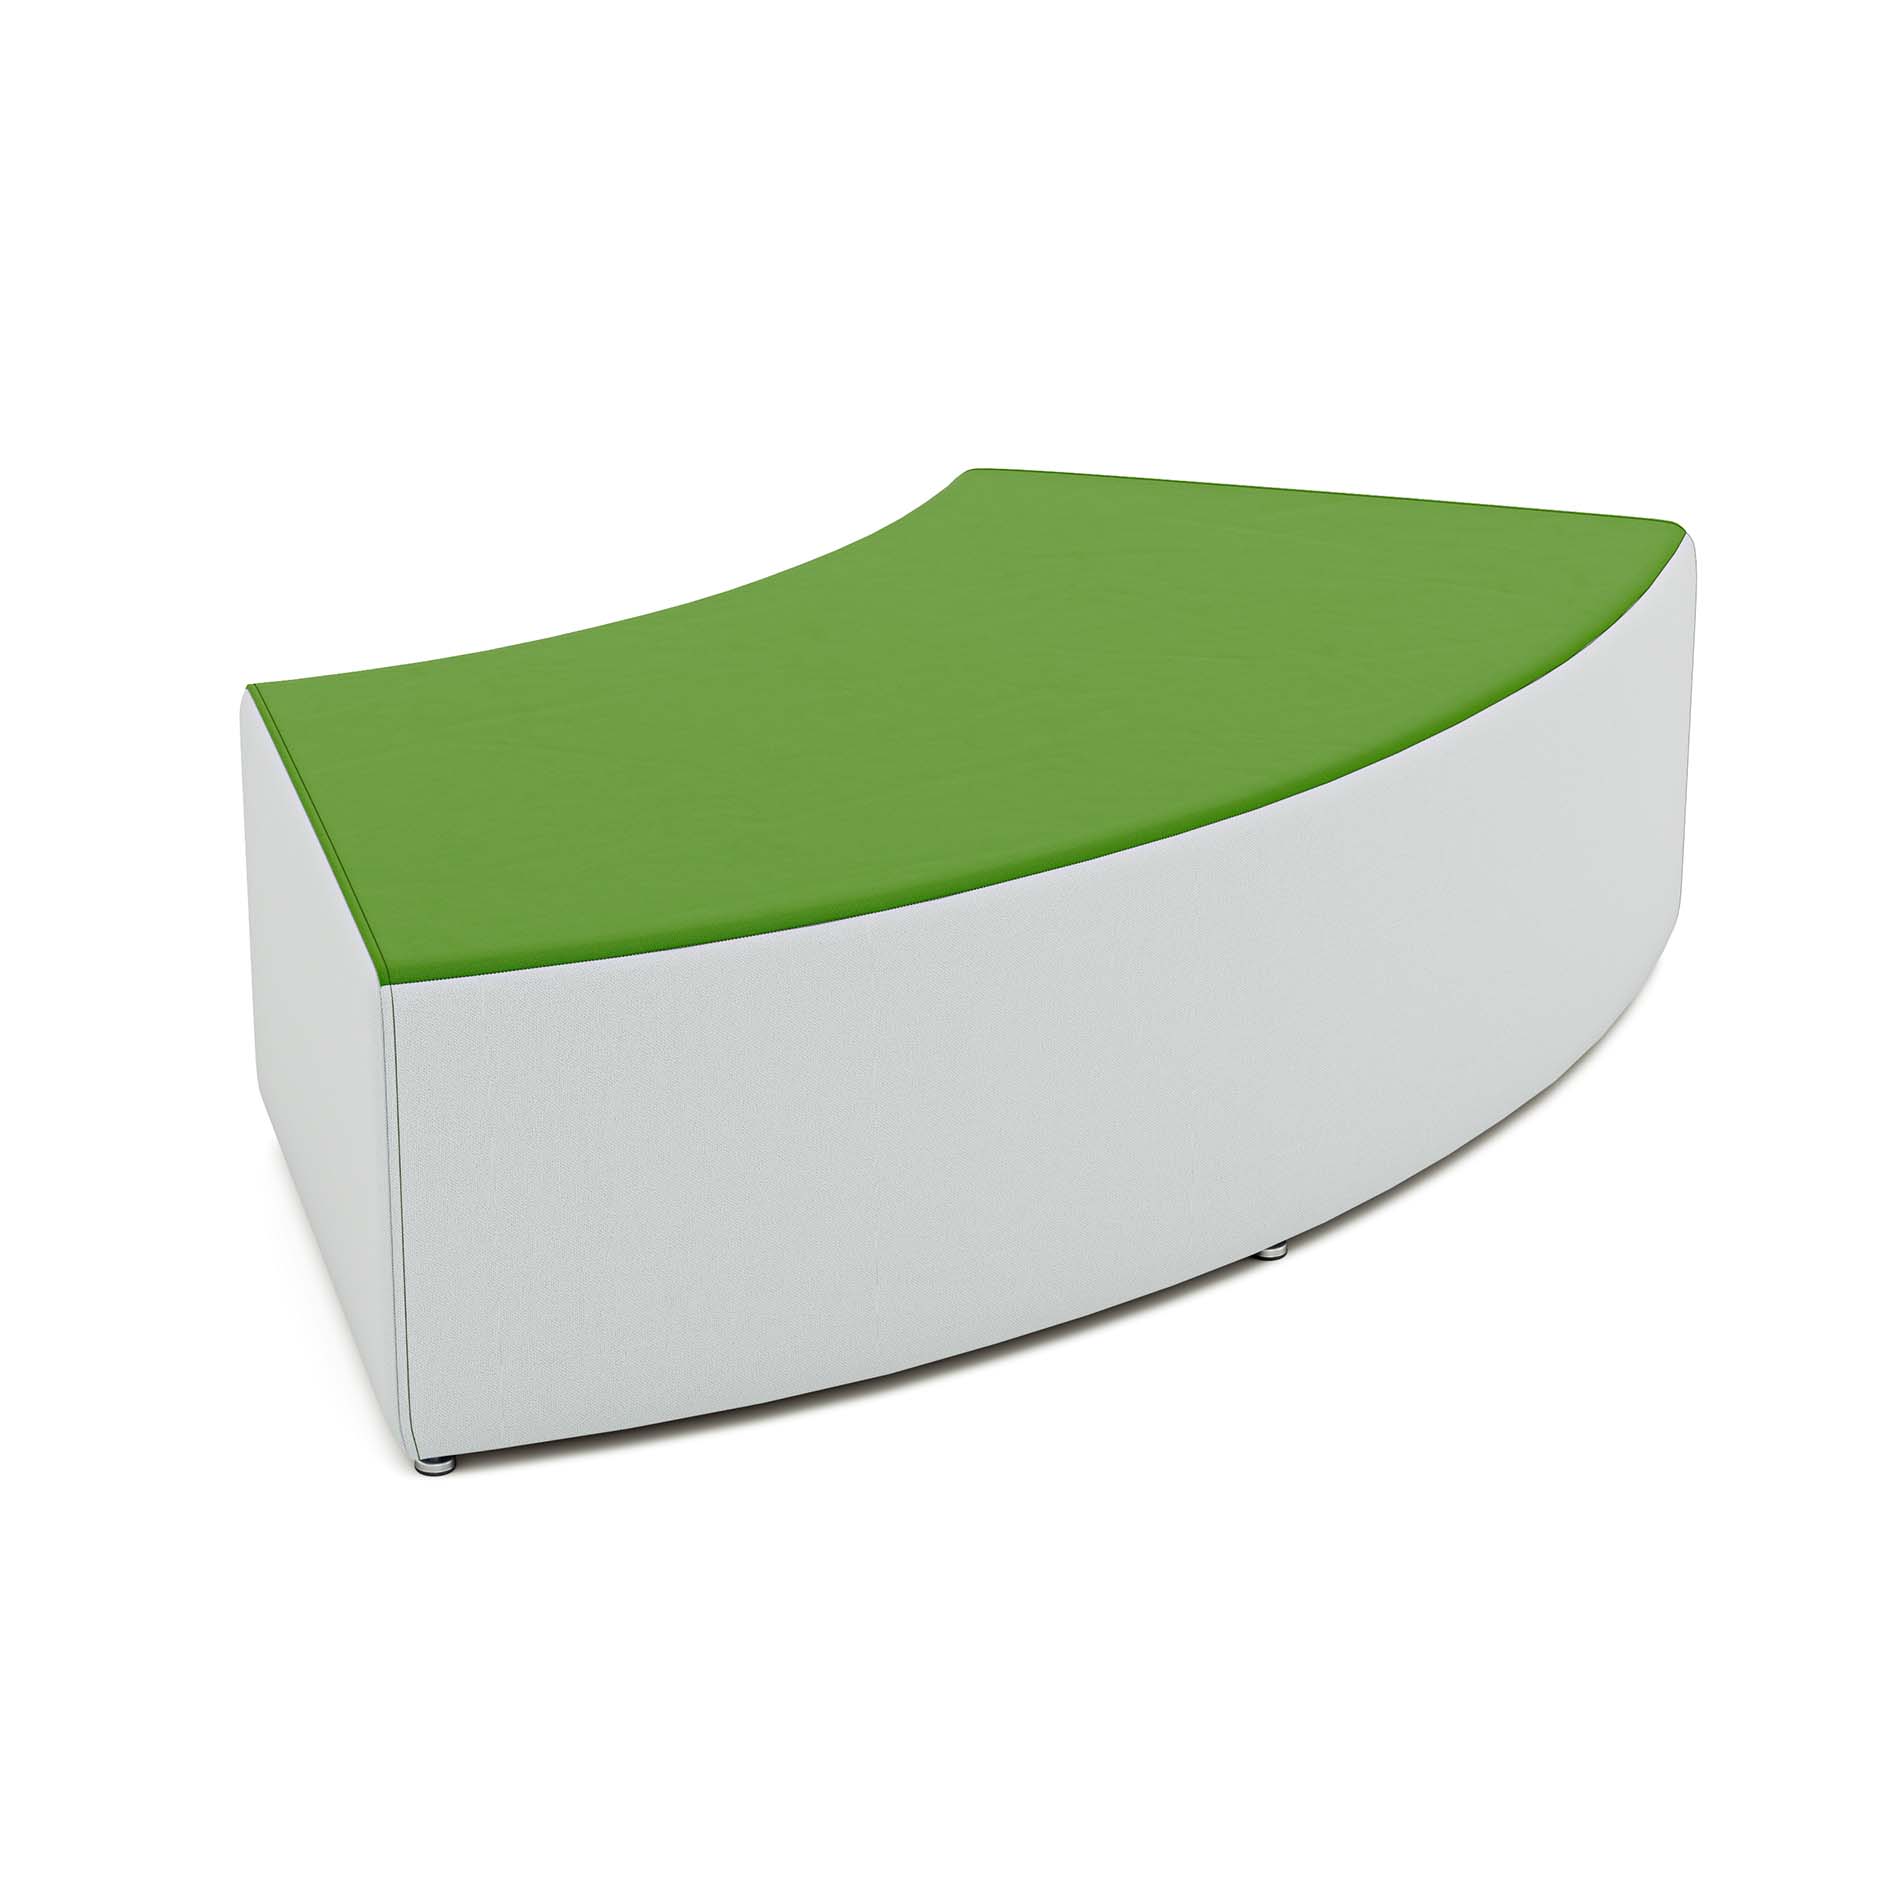 F106 Curved Bench 60